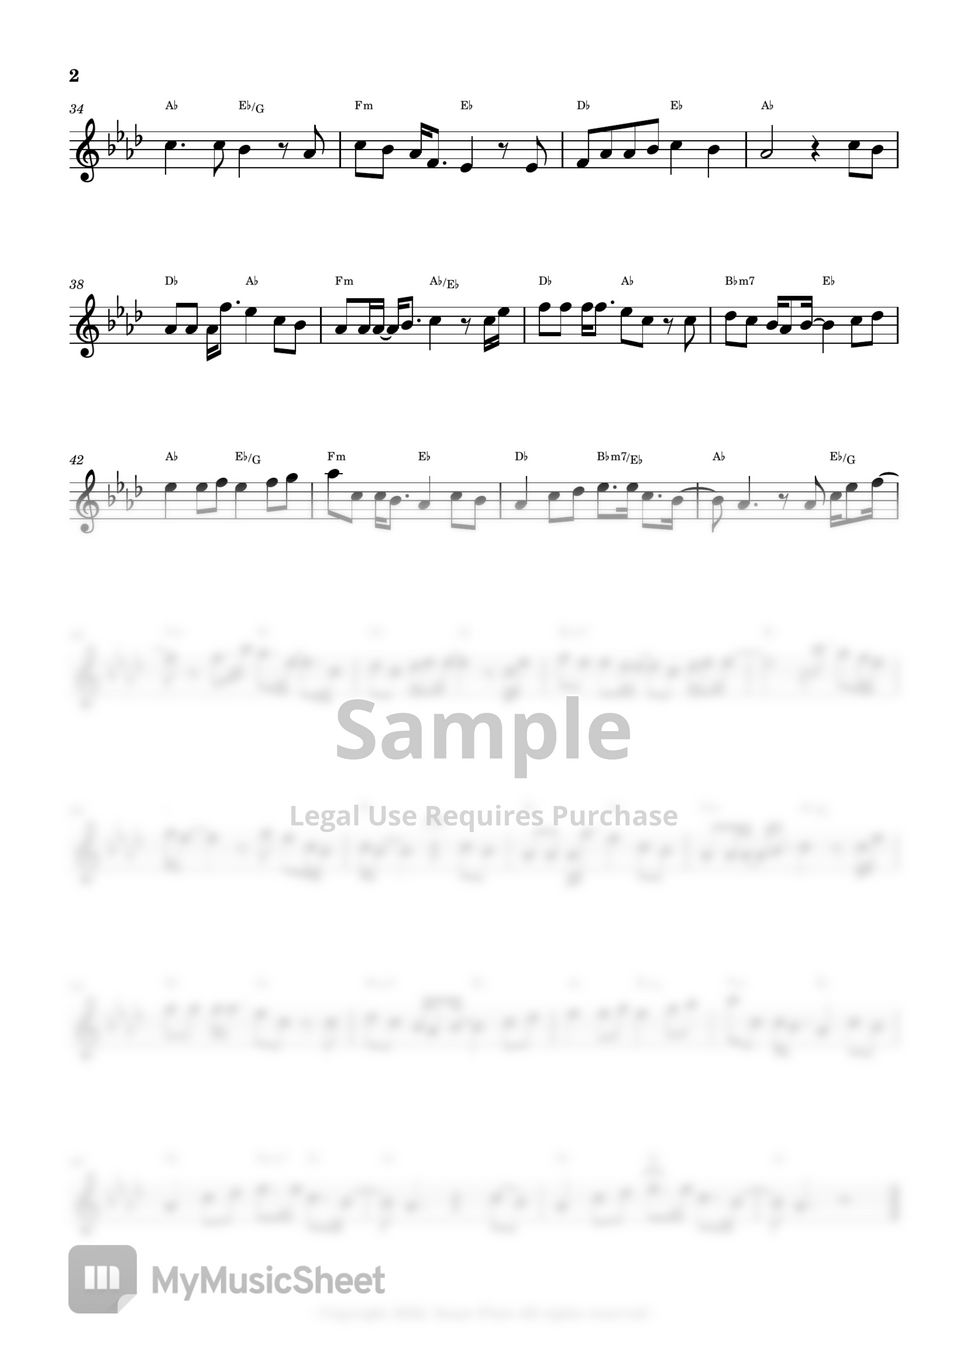 Lim Young Woong 임영웅 - Love Always Run Away 사랑은 늘 도망가 (Flute Sheet Music) by sonye flute